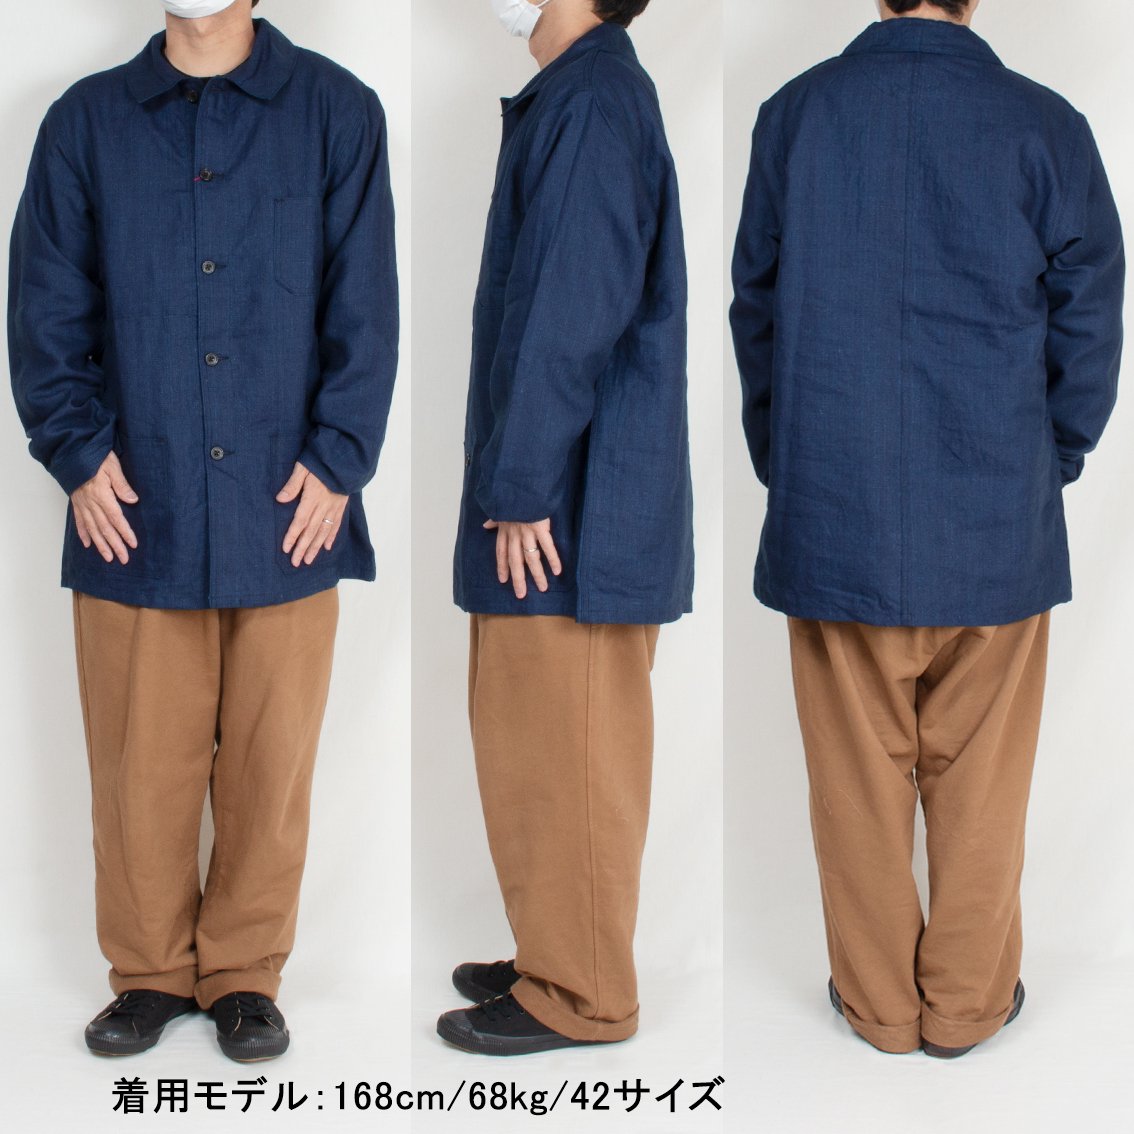 Le Sans Pareil / ル サン パレイユ] LINEN TRADITIONAL COVERALL